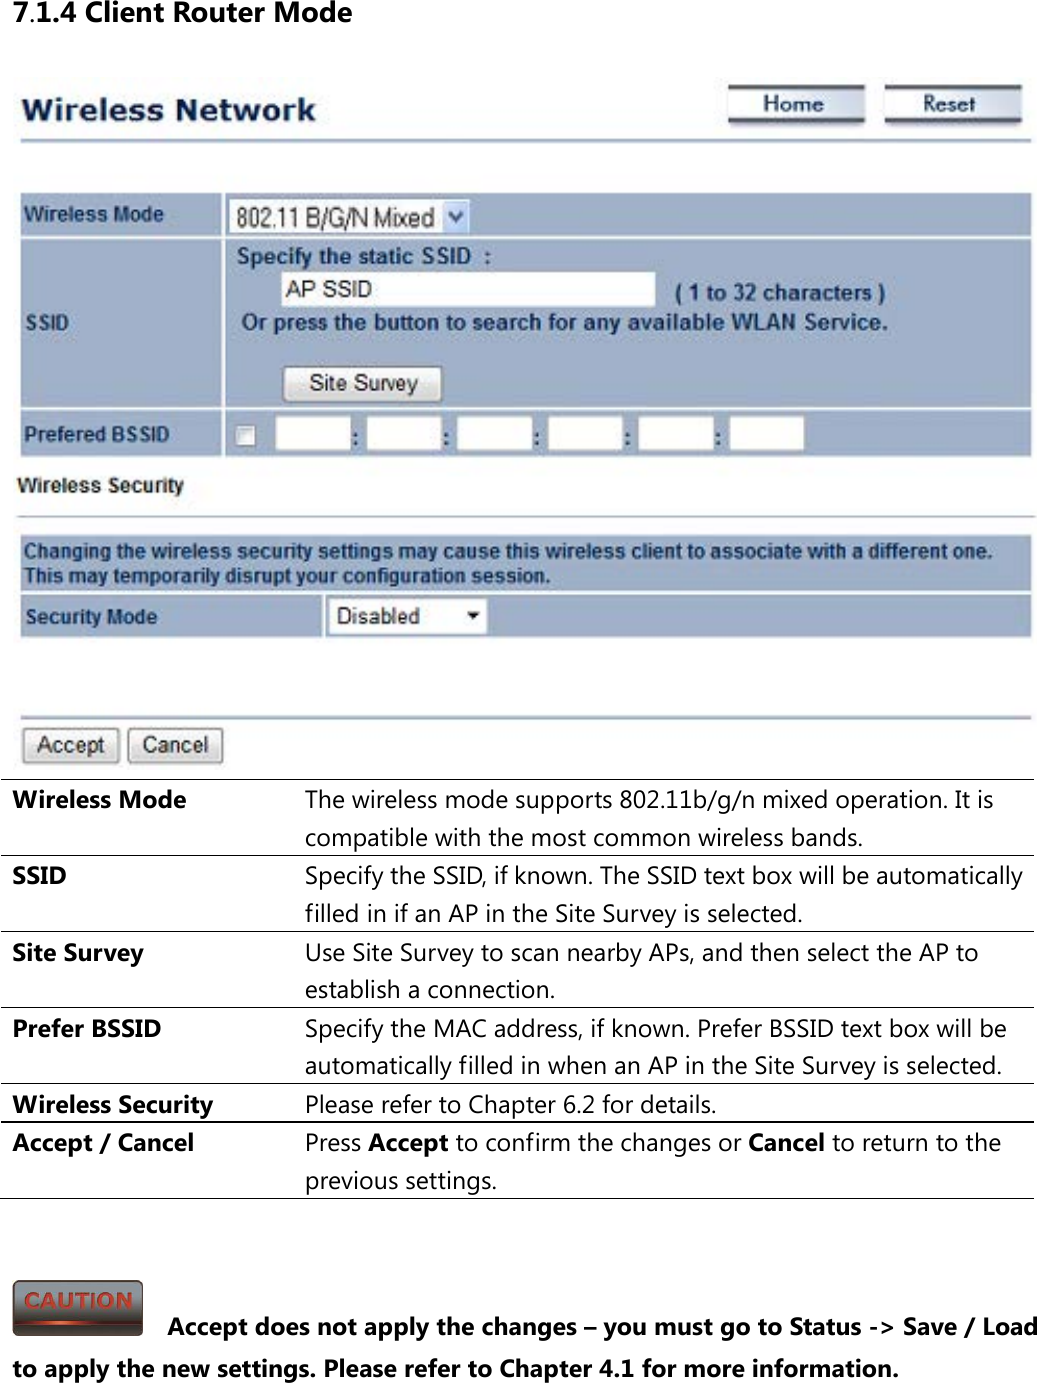 7.1.4 Client Router Mode  Wireless Mode The wireless mode supports 802.11b/g/n mixed operation. It is compatible with the most common wireless bands. SSID  Specify the SSID, if known. The SSID text box will be automatically filled in if an AP in the Site Survey is selected. Site Survey Use Site Survey to scan nearby APs, and then select the AP to establish a connection. Prefer BSSID Specify the MAC address, if known. Prefer BSSID text box will be automatically filled in when an AP in the Site Survey is selected. Wireless Security Please refer to Chapter 6.2 for details. Accept / Cancel Press Accept to confirm the changes or Cancel to return to the previous settings.     Accept does not apply the changes – you must go to Status -&gt; Save / Load to apply the new settings. Please refer to Chapter 4.1 for more information. 